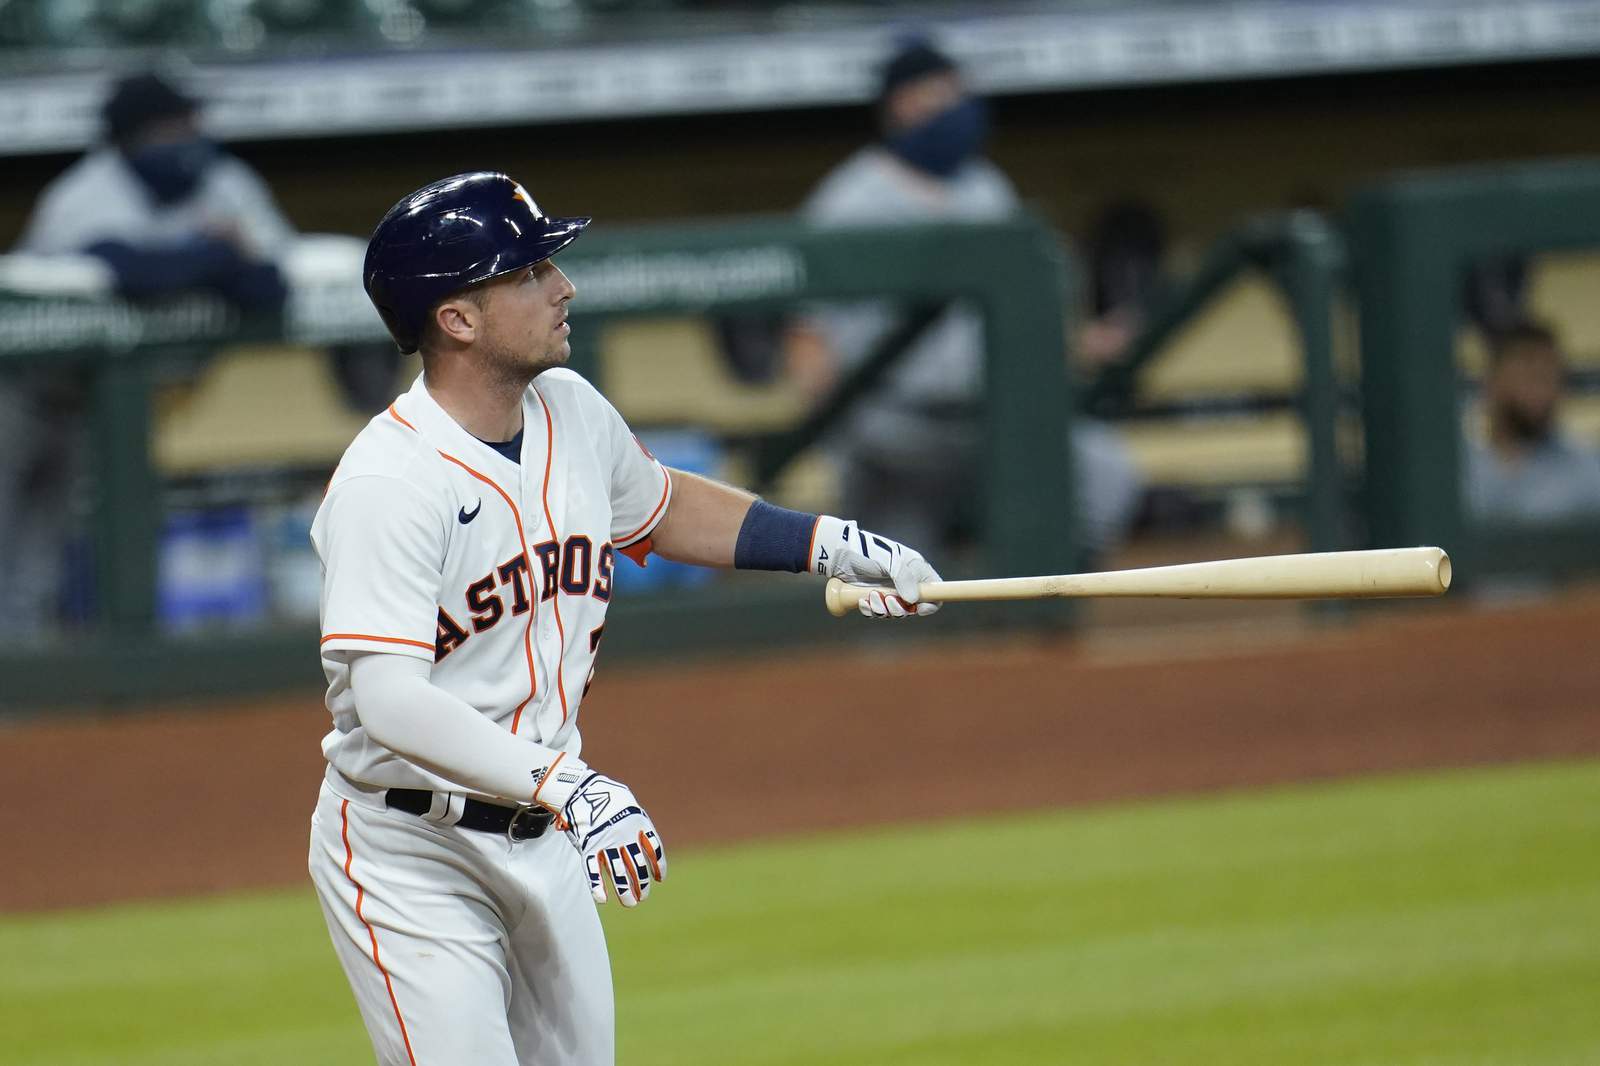 COMMENTARY: How does Alex Bregman’s injury affect the Astros’ World Series chances?